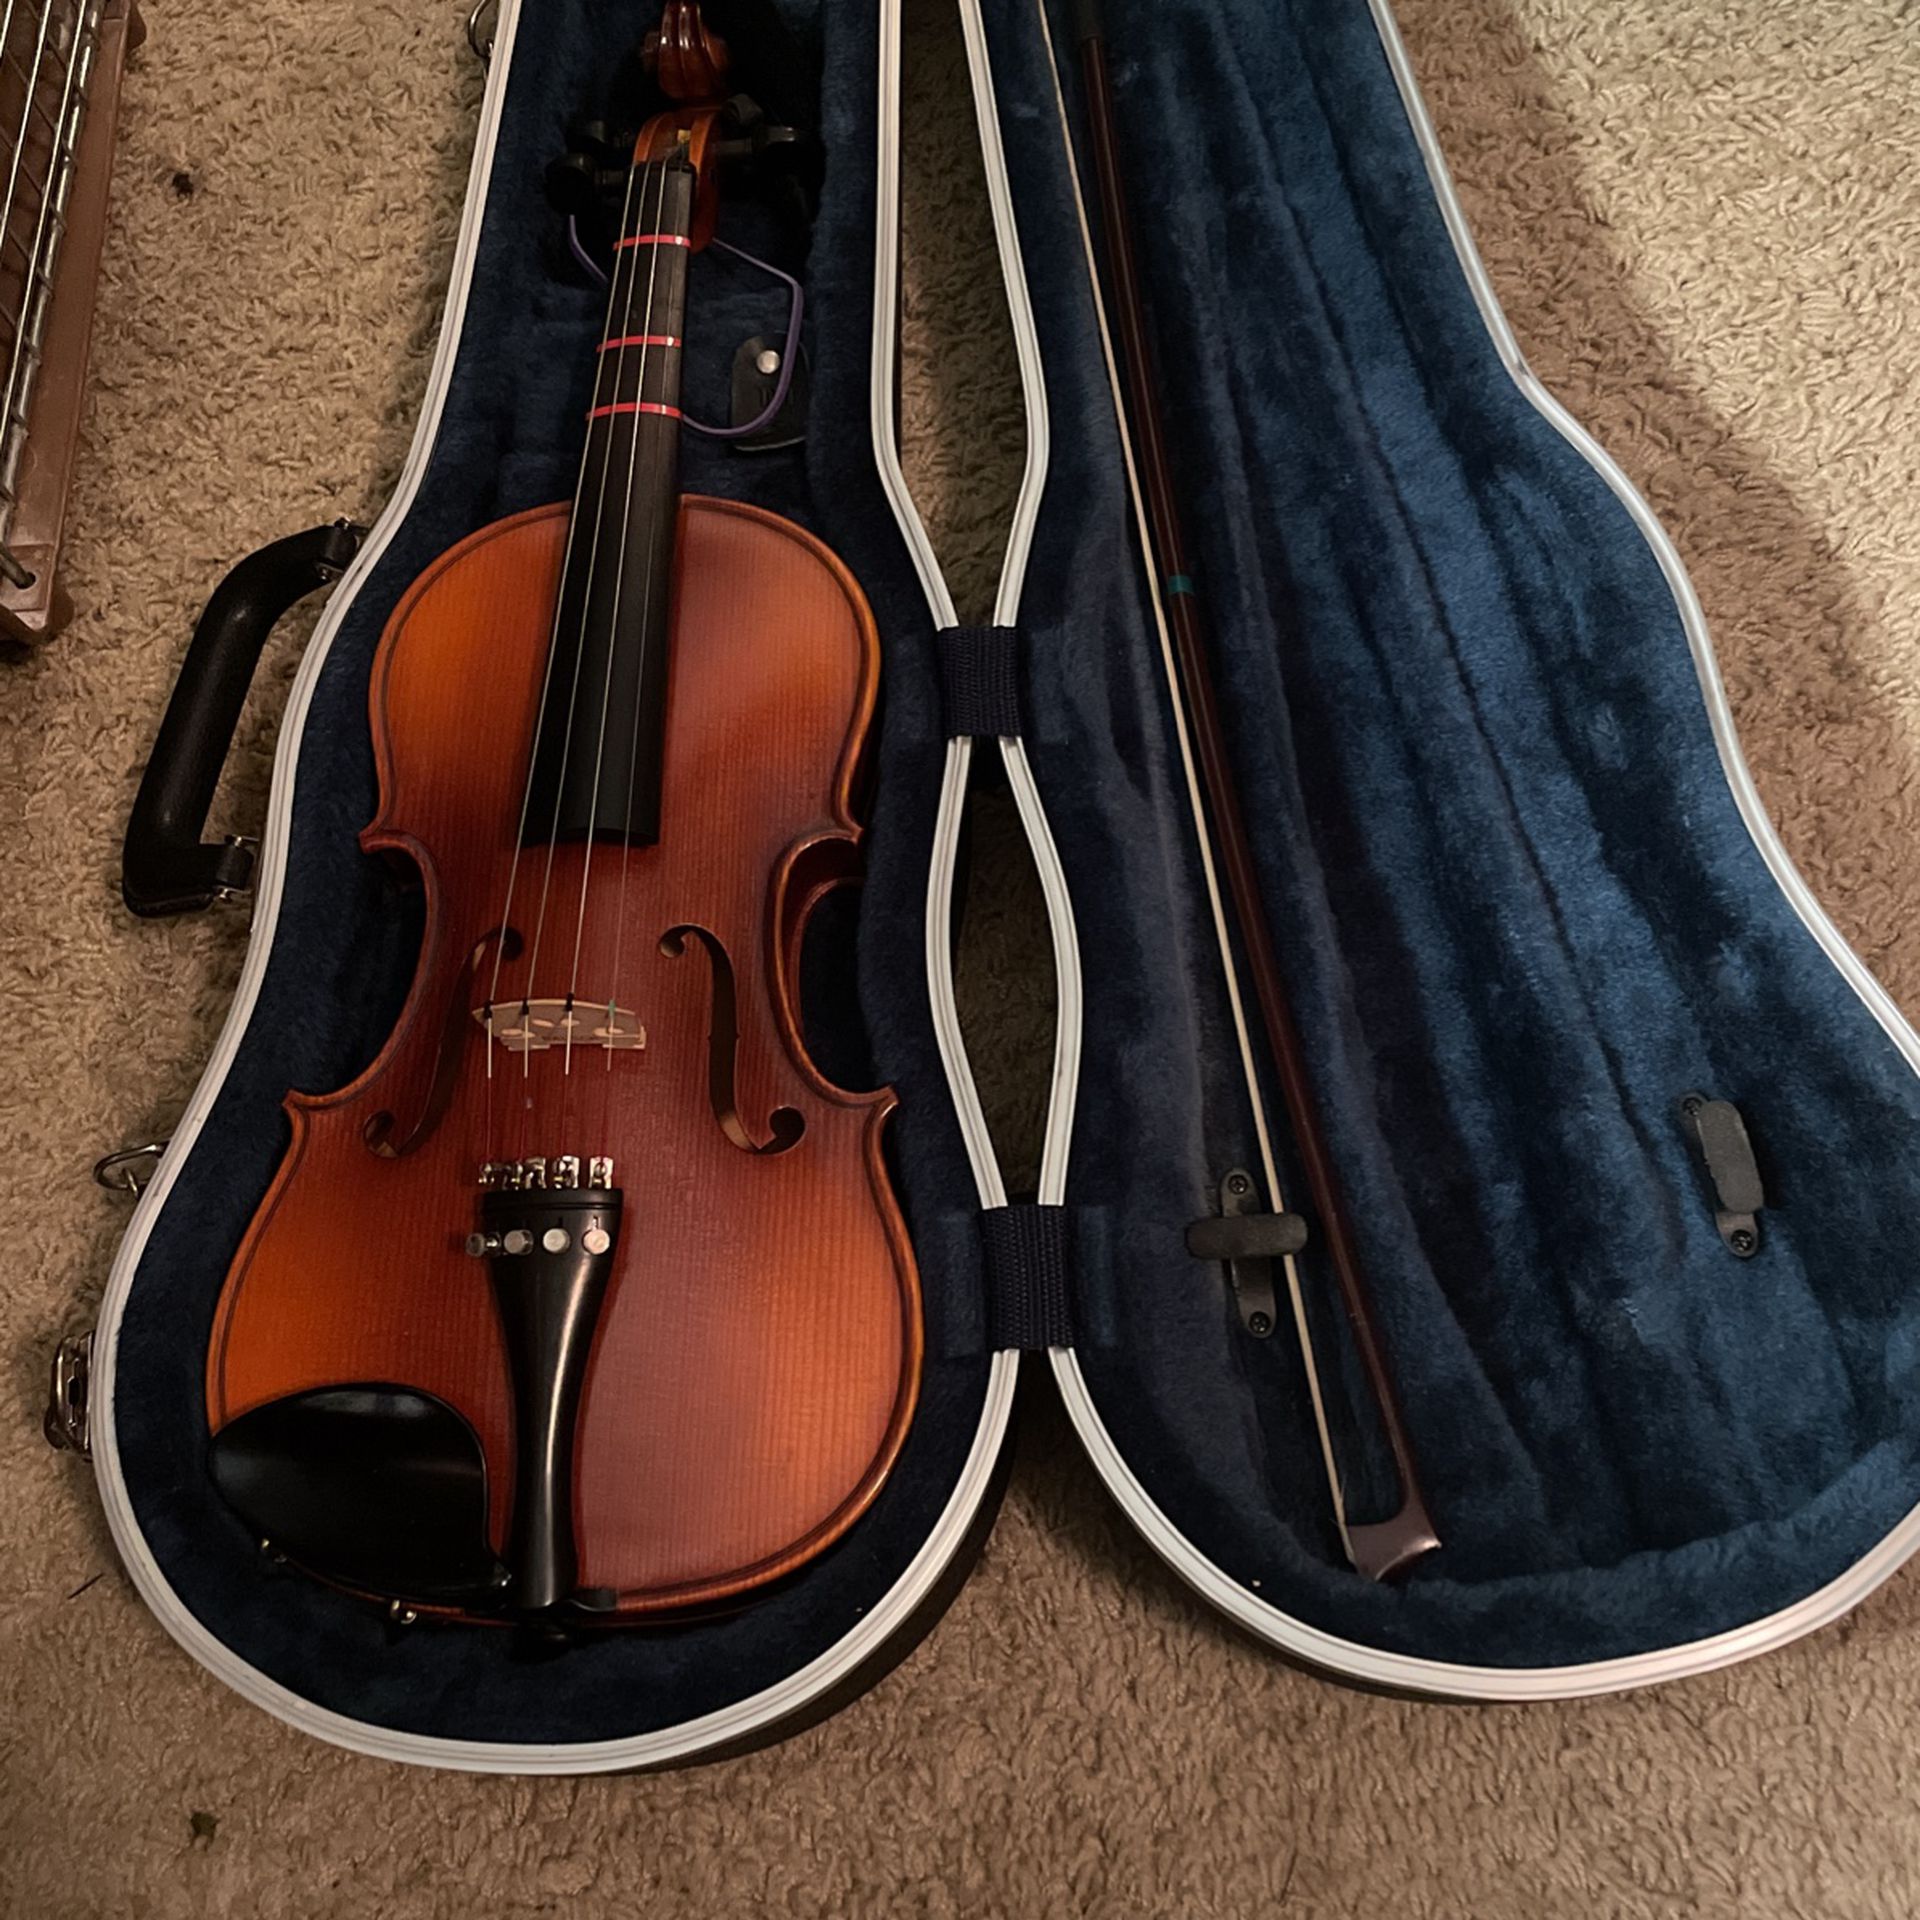 Bucharest 3/4 Violin with Case and Accessories Like New Brand New Went For  500.00 Asking 150.00